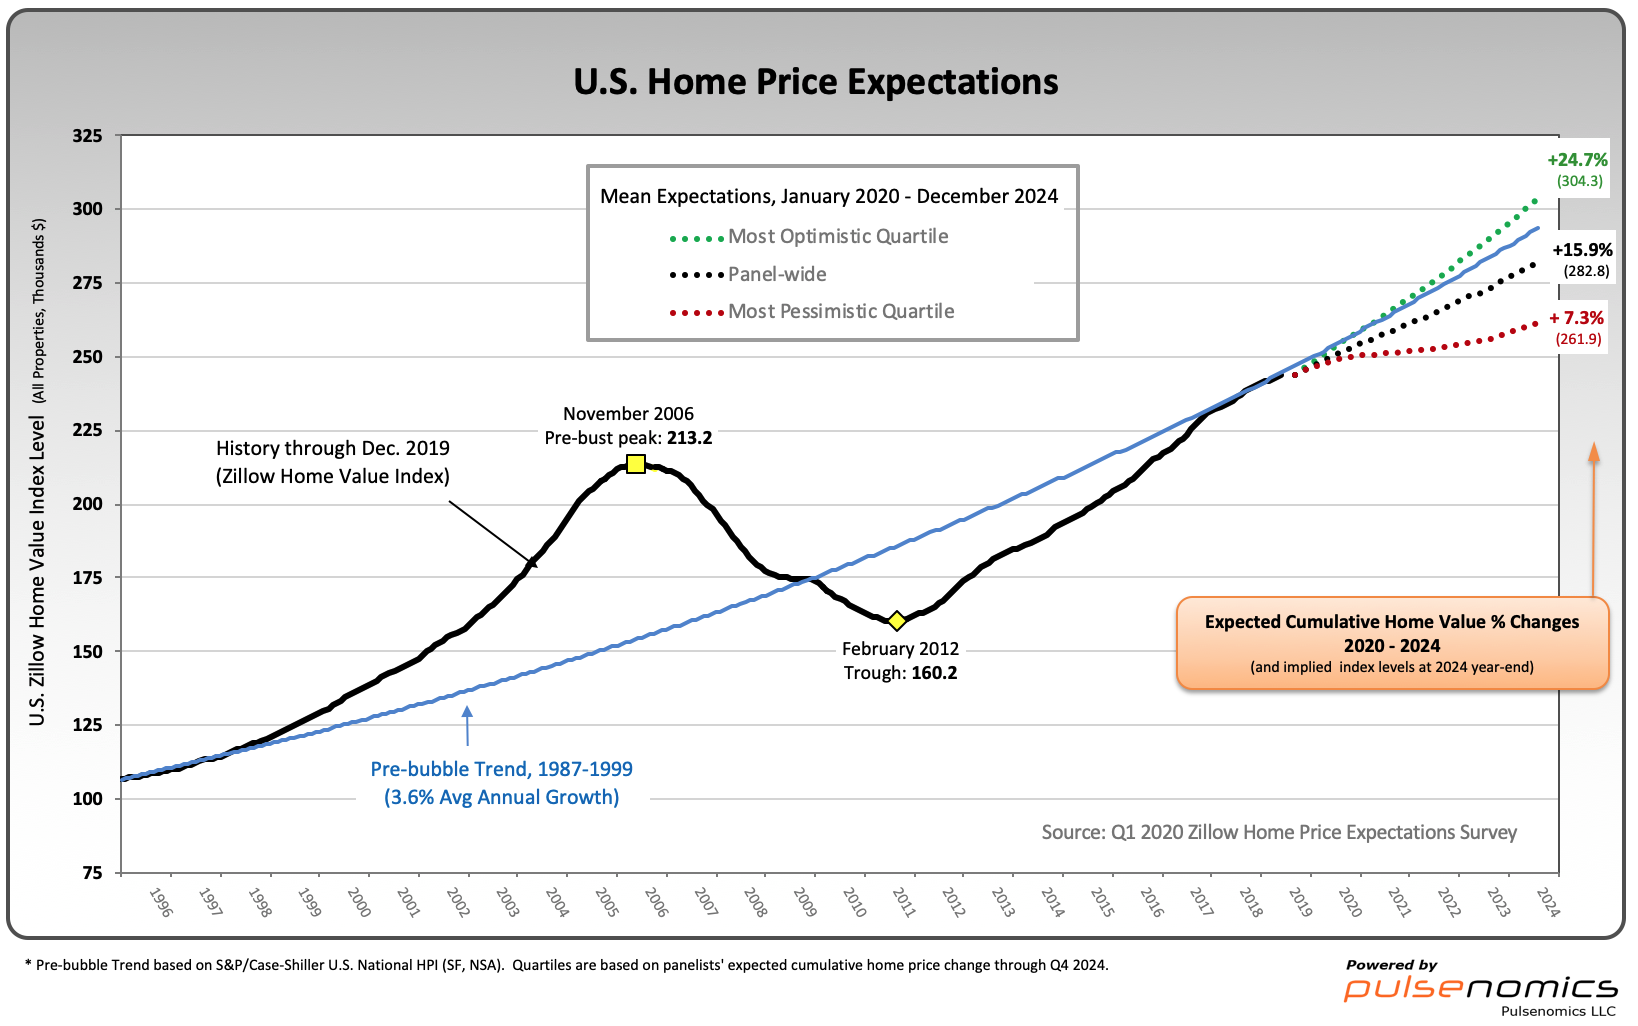 EconomicGreenfield Zillow Q1 2020 Home Price Expectations Survey